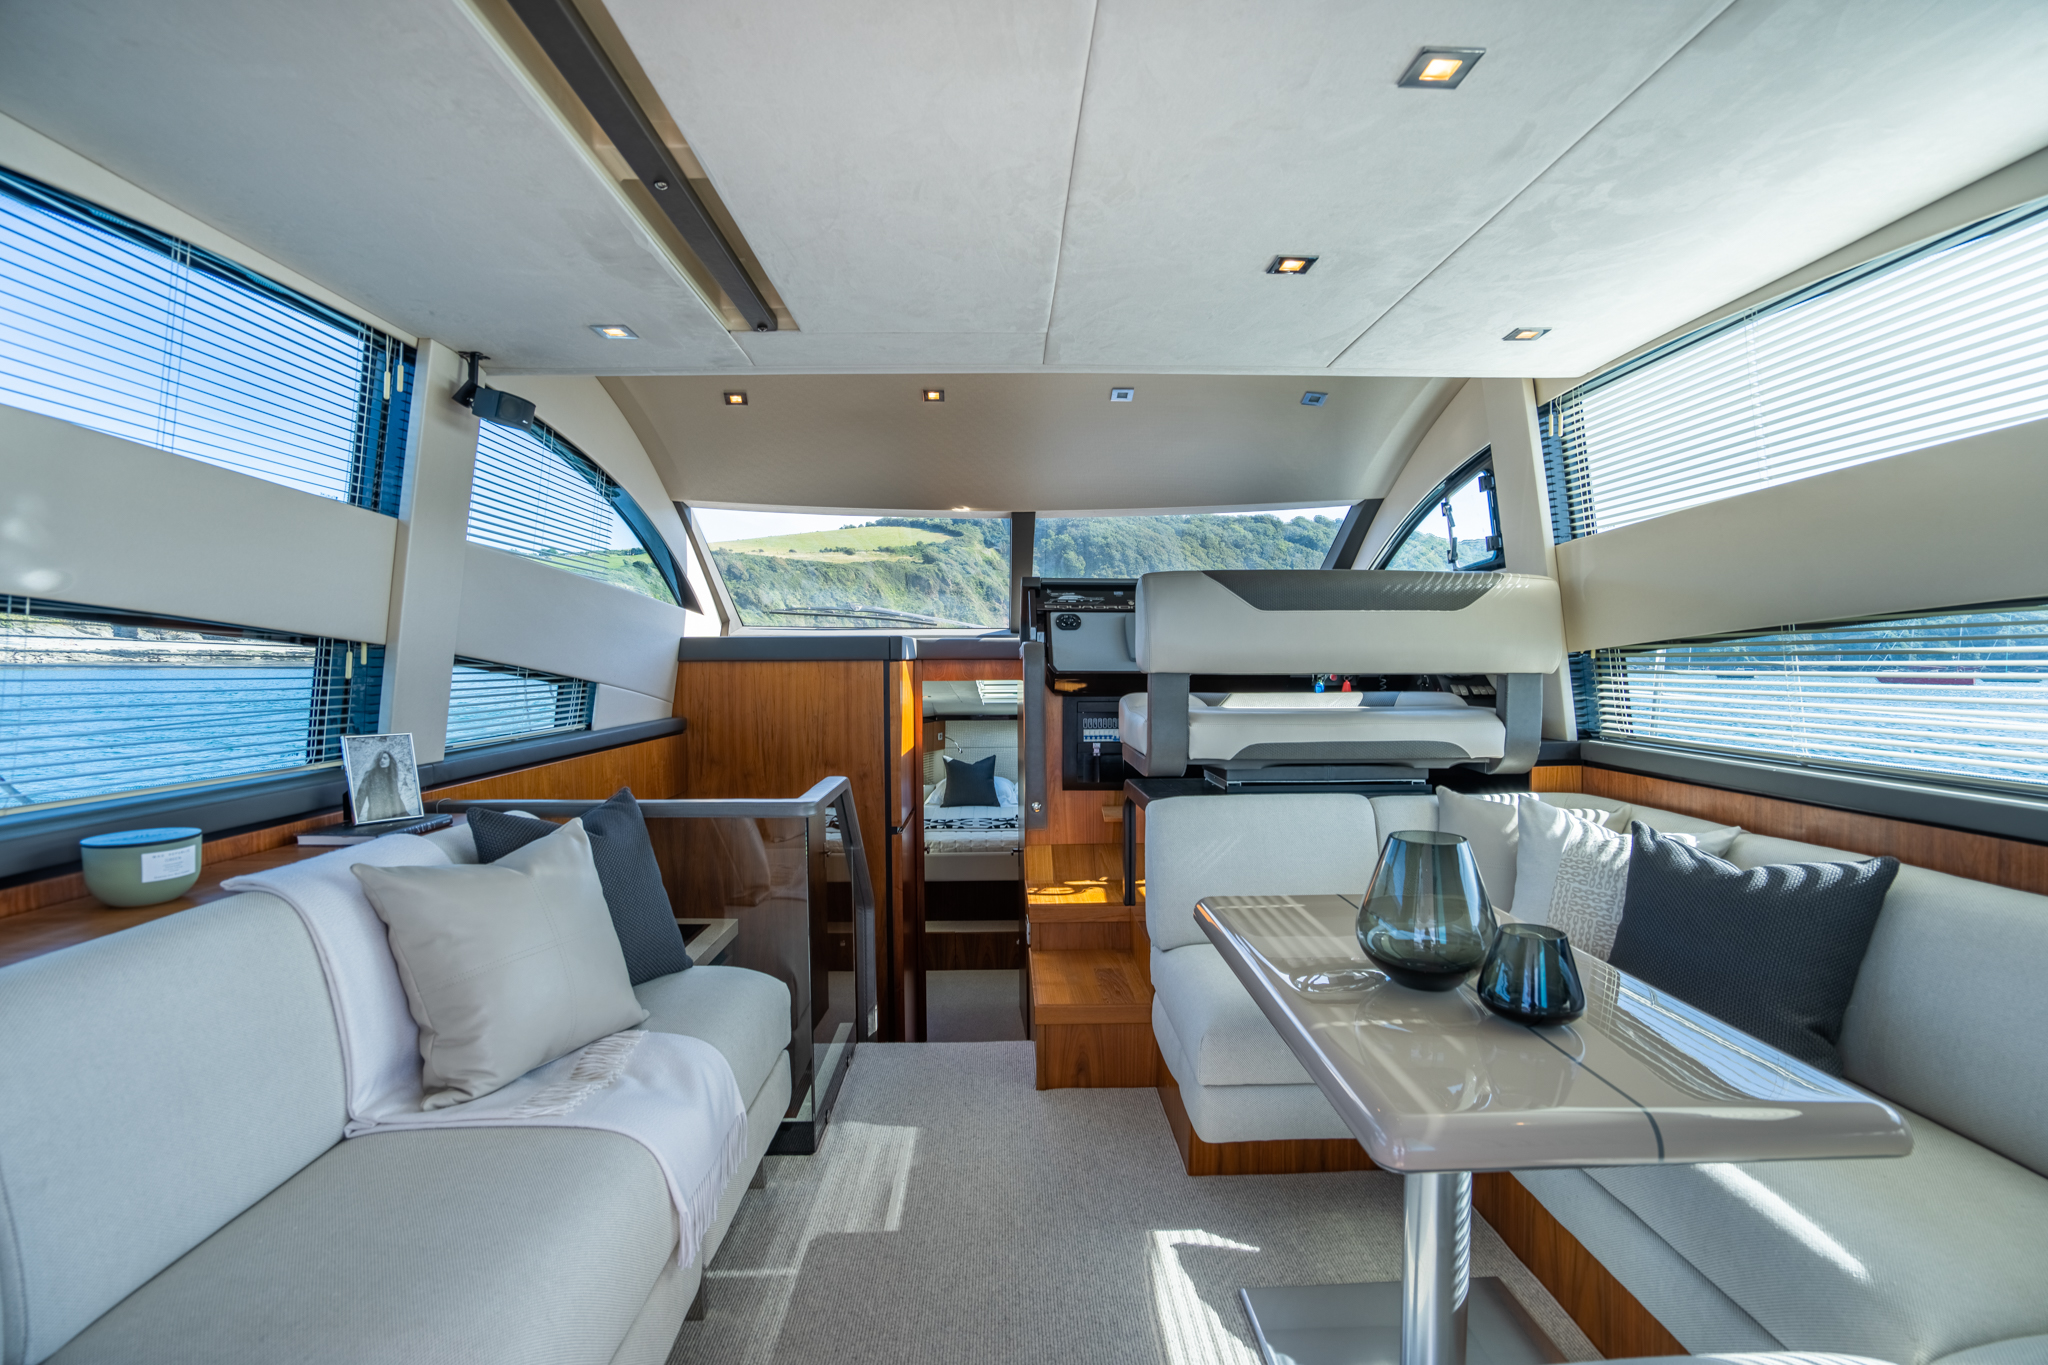 A modern and sleek yacht saloon interior after a yacht refit from setag